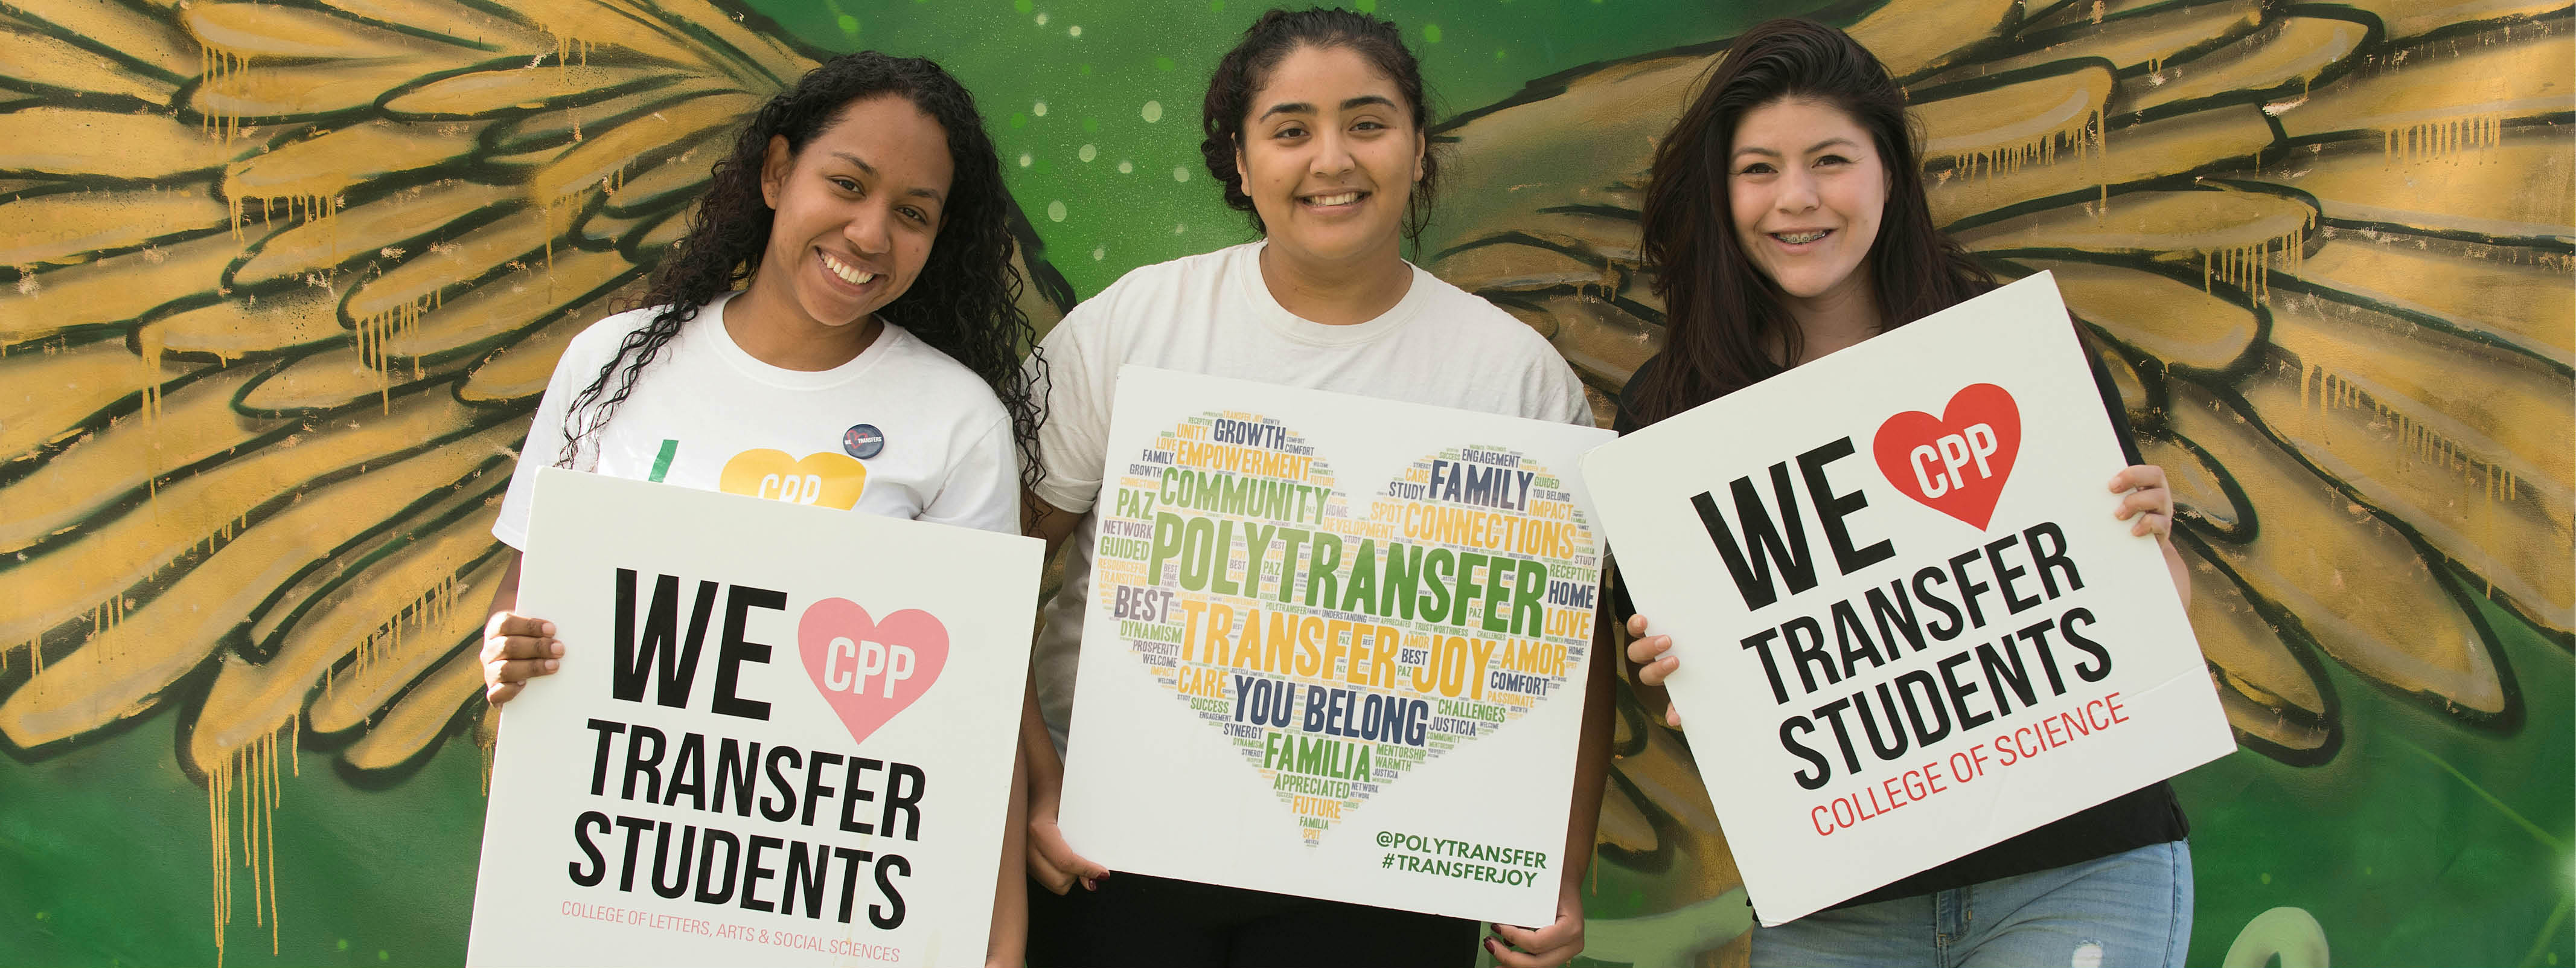 Three female students stand together holding PolyTransfer sign.